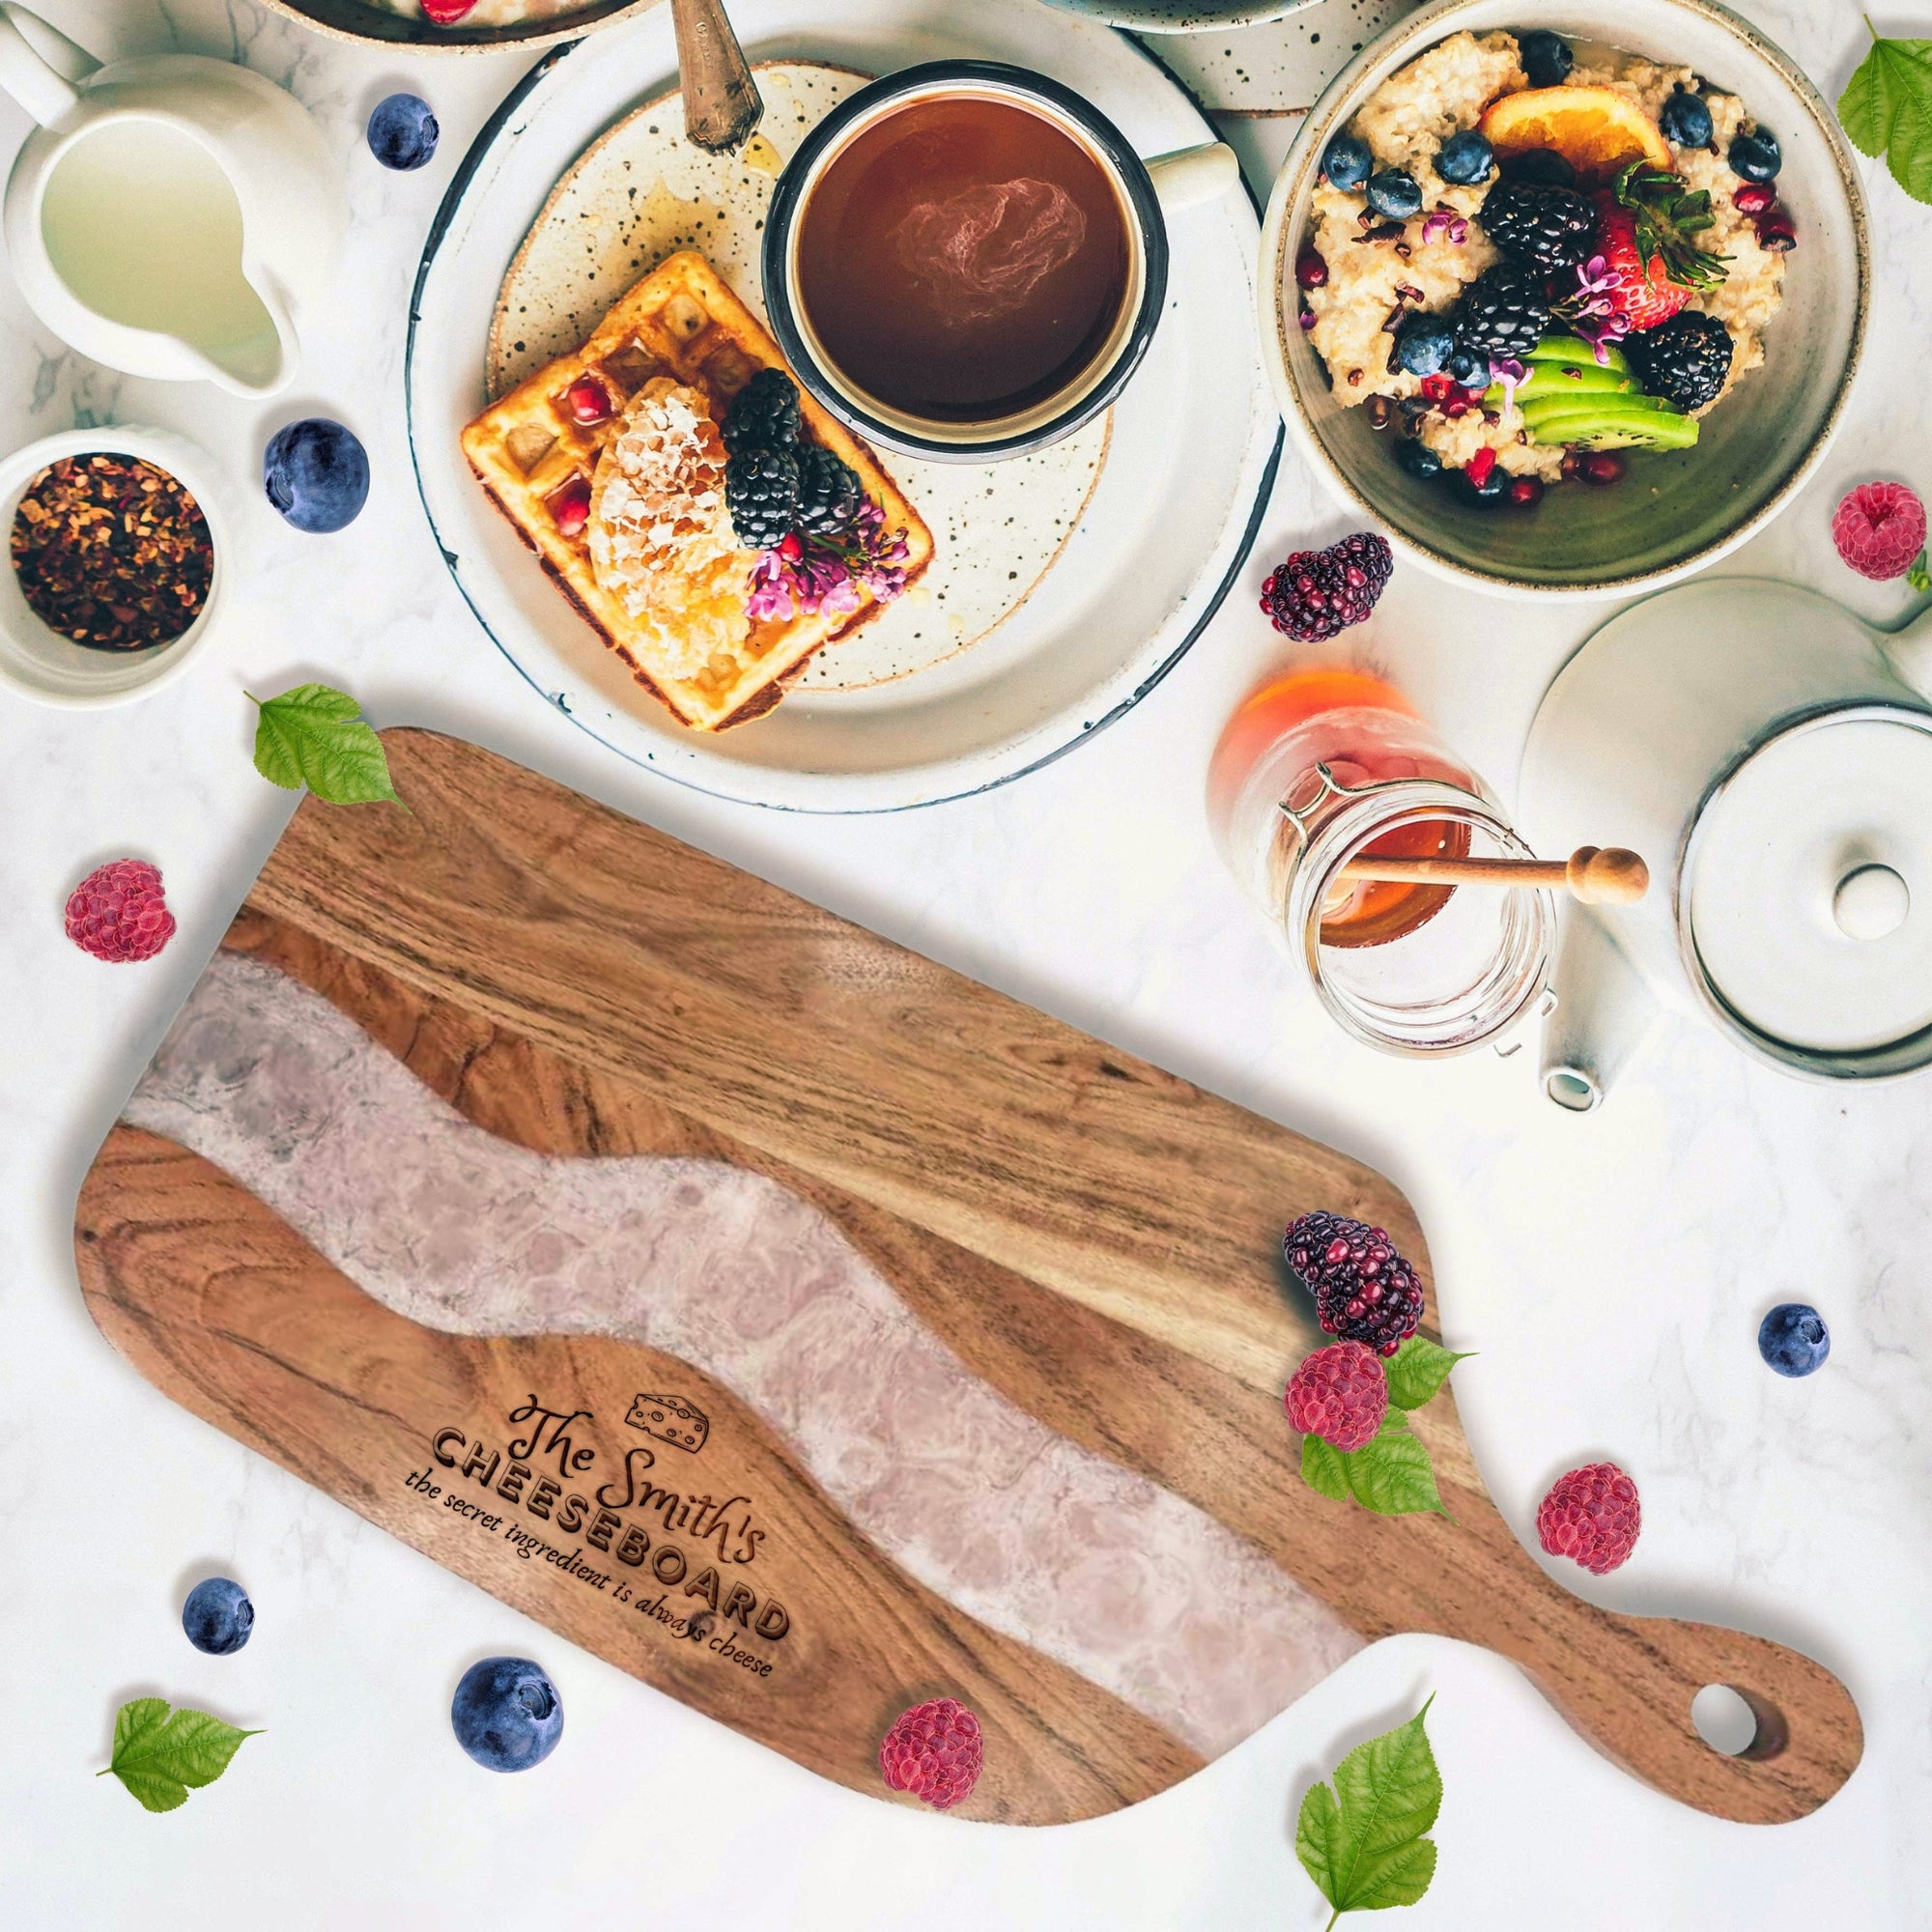 Personalised Acacia Wood &amp; Resin Cheese Serving Board, Custom Engraved Cutting/ Chopping Paddle Tray, Charcuterie Platter, Housewarming Gift